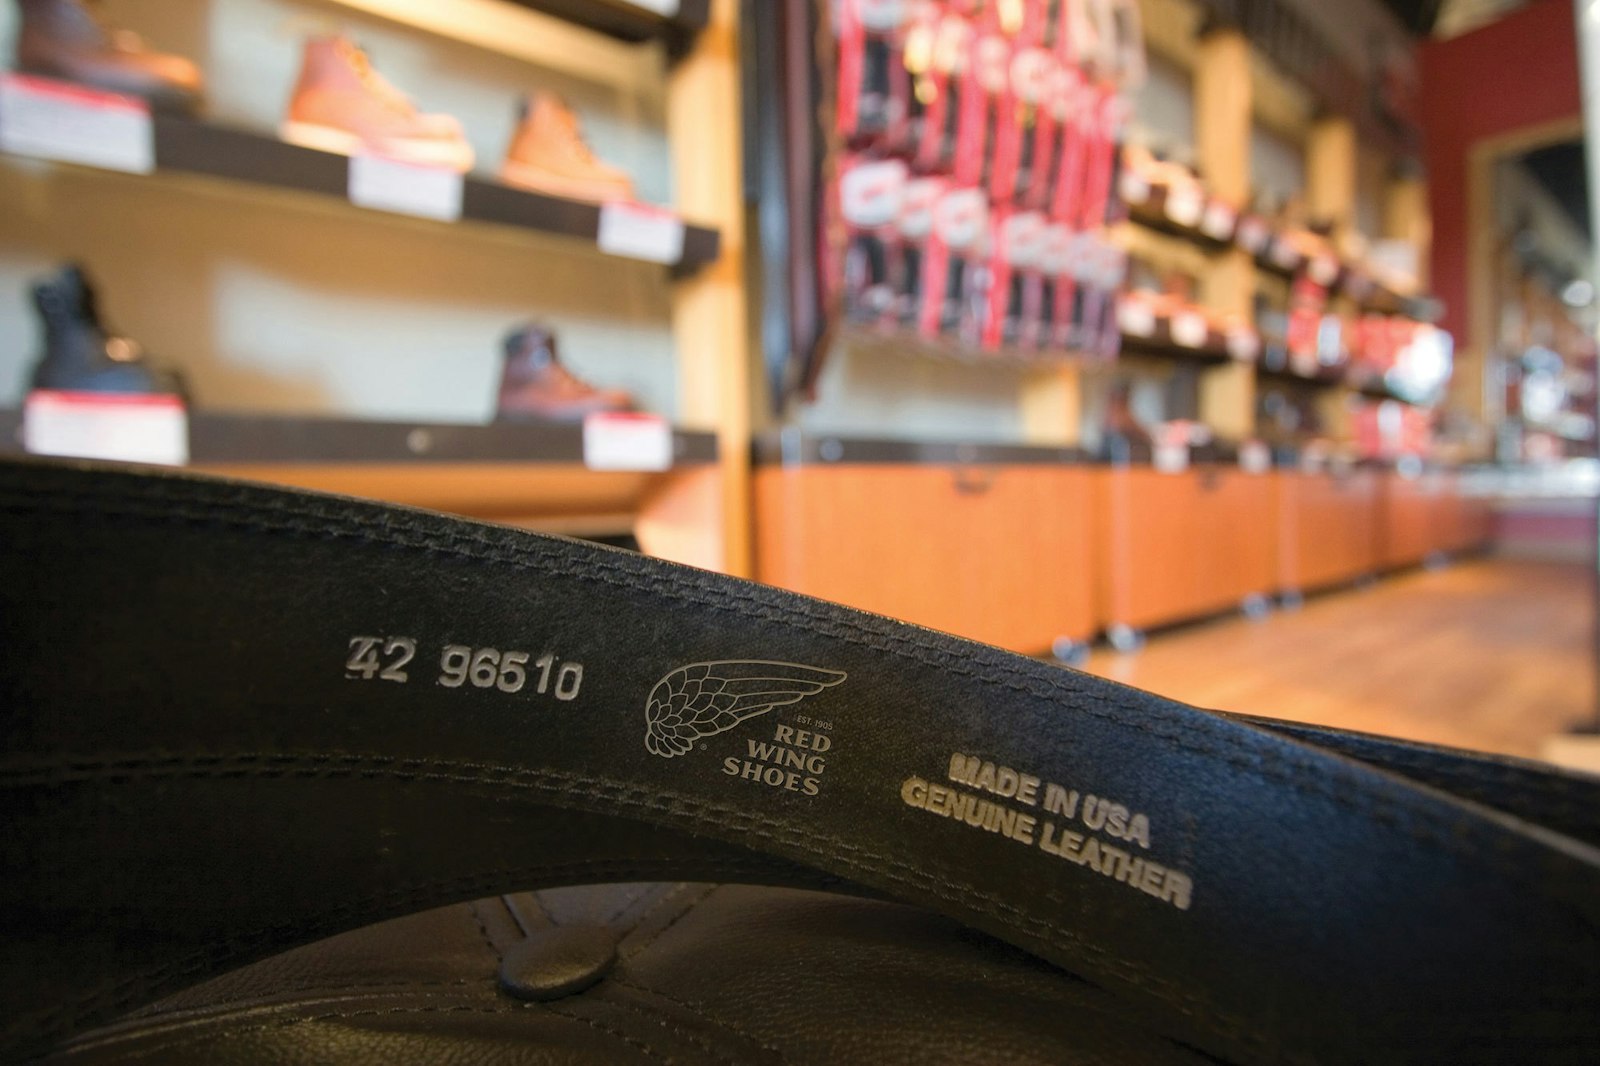 The Red Wing Shoes brand design logo on the inside of a belt.